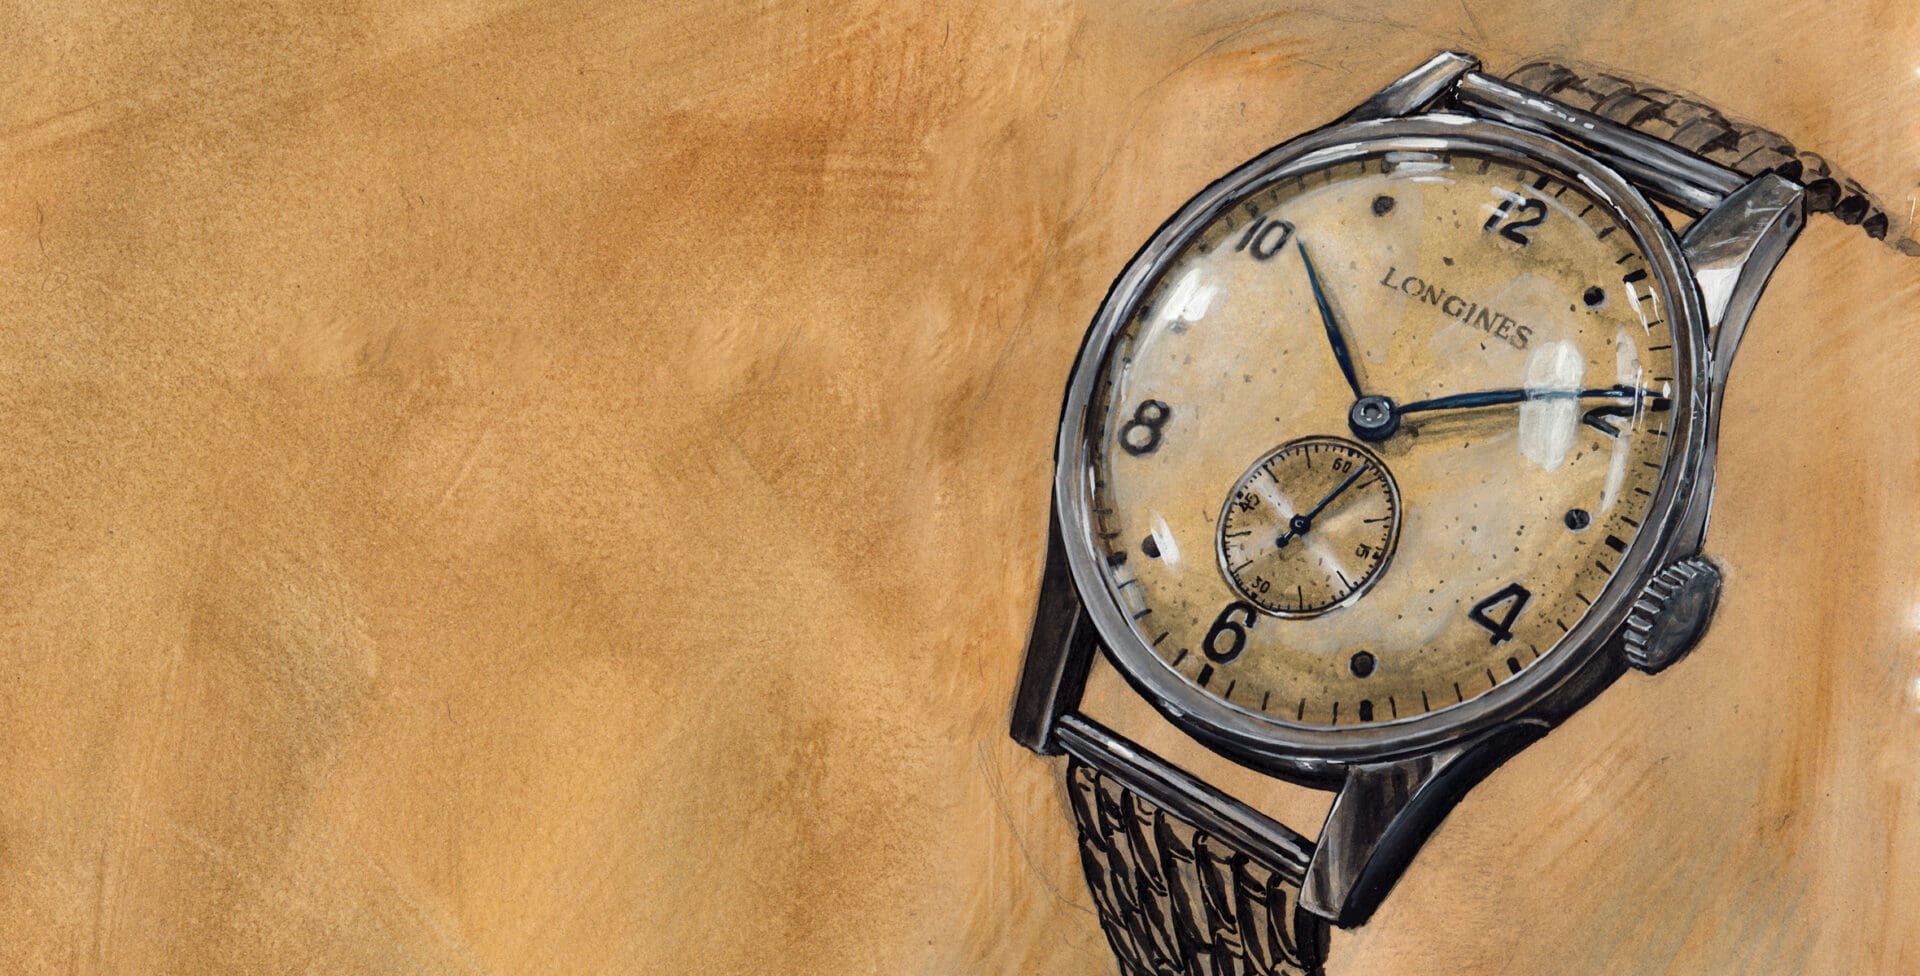 BREAKING NEWS: The Longines Watercolour Watch Project, proudly brought to you by Time+Tide